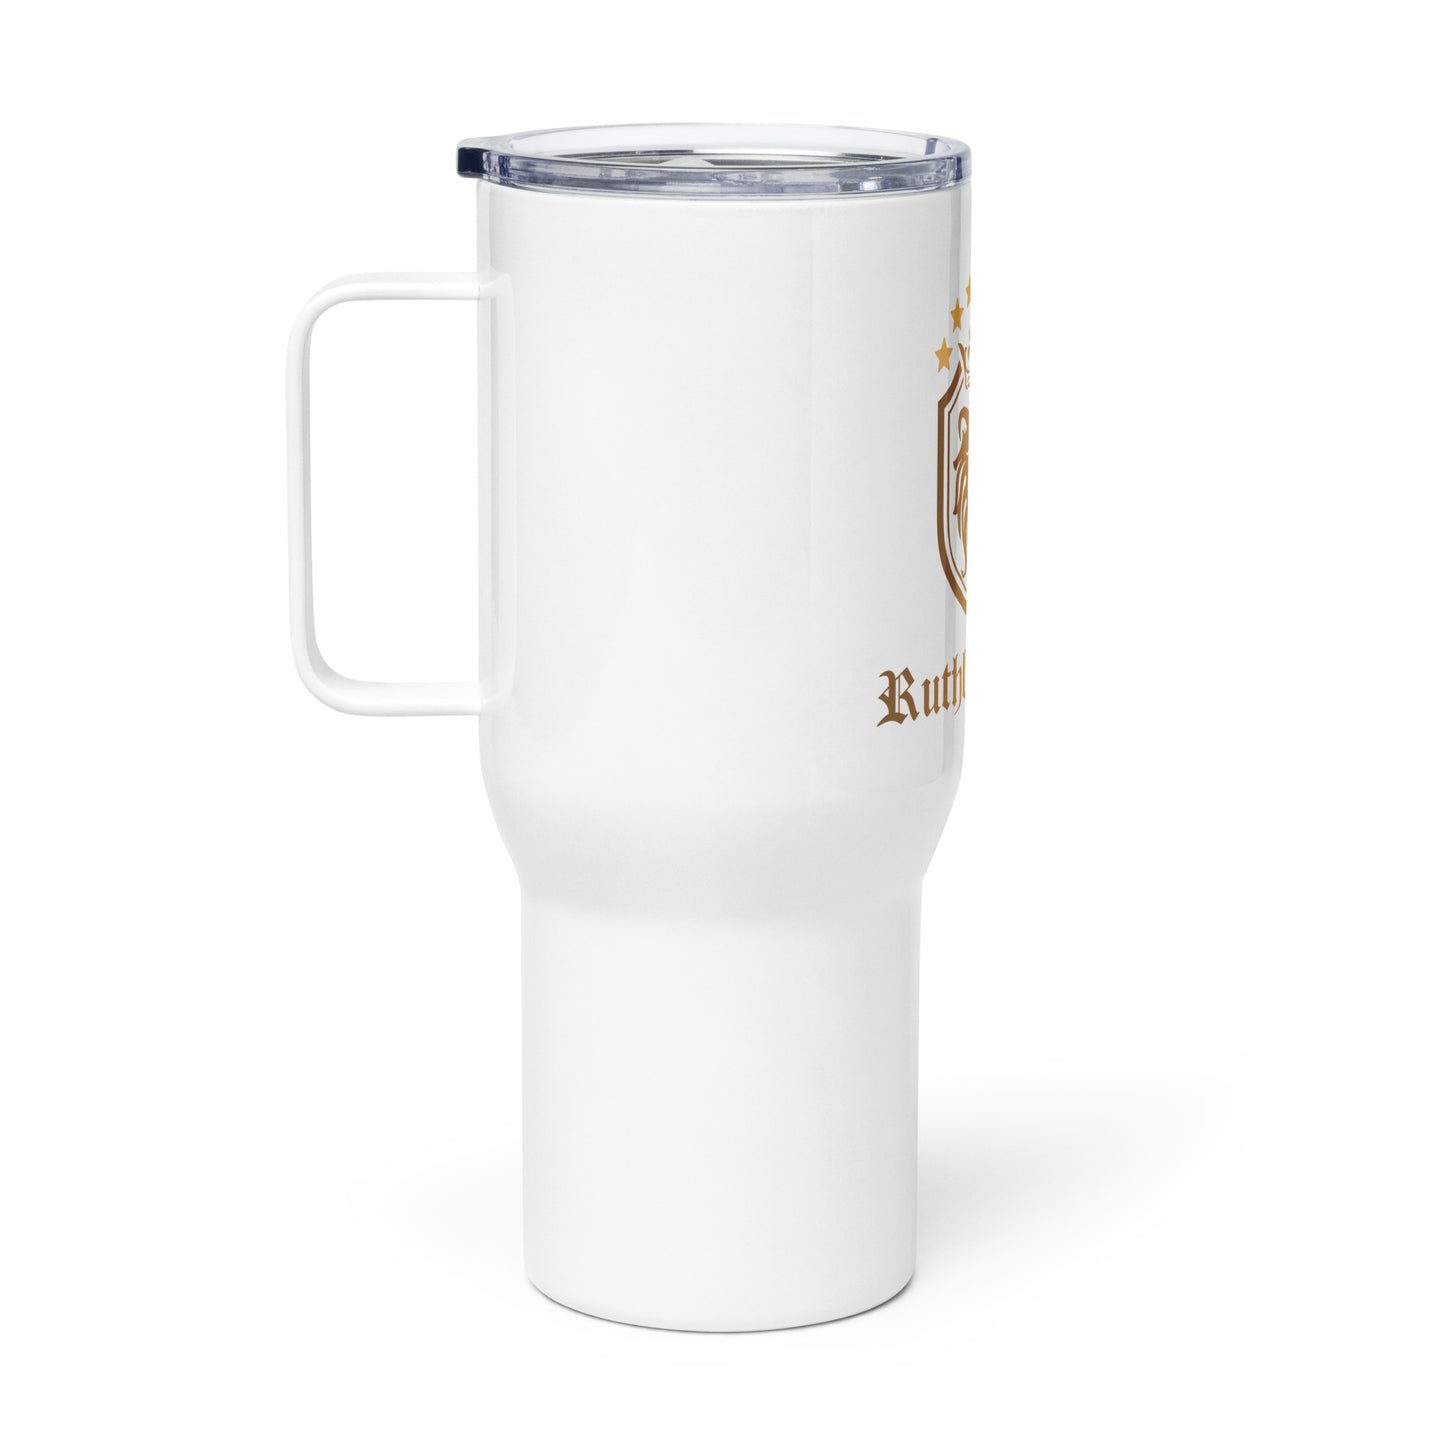 Ruthless Lion Travel mug with a handle